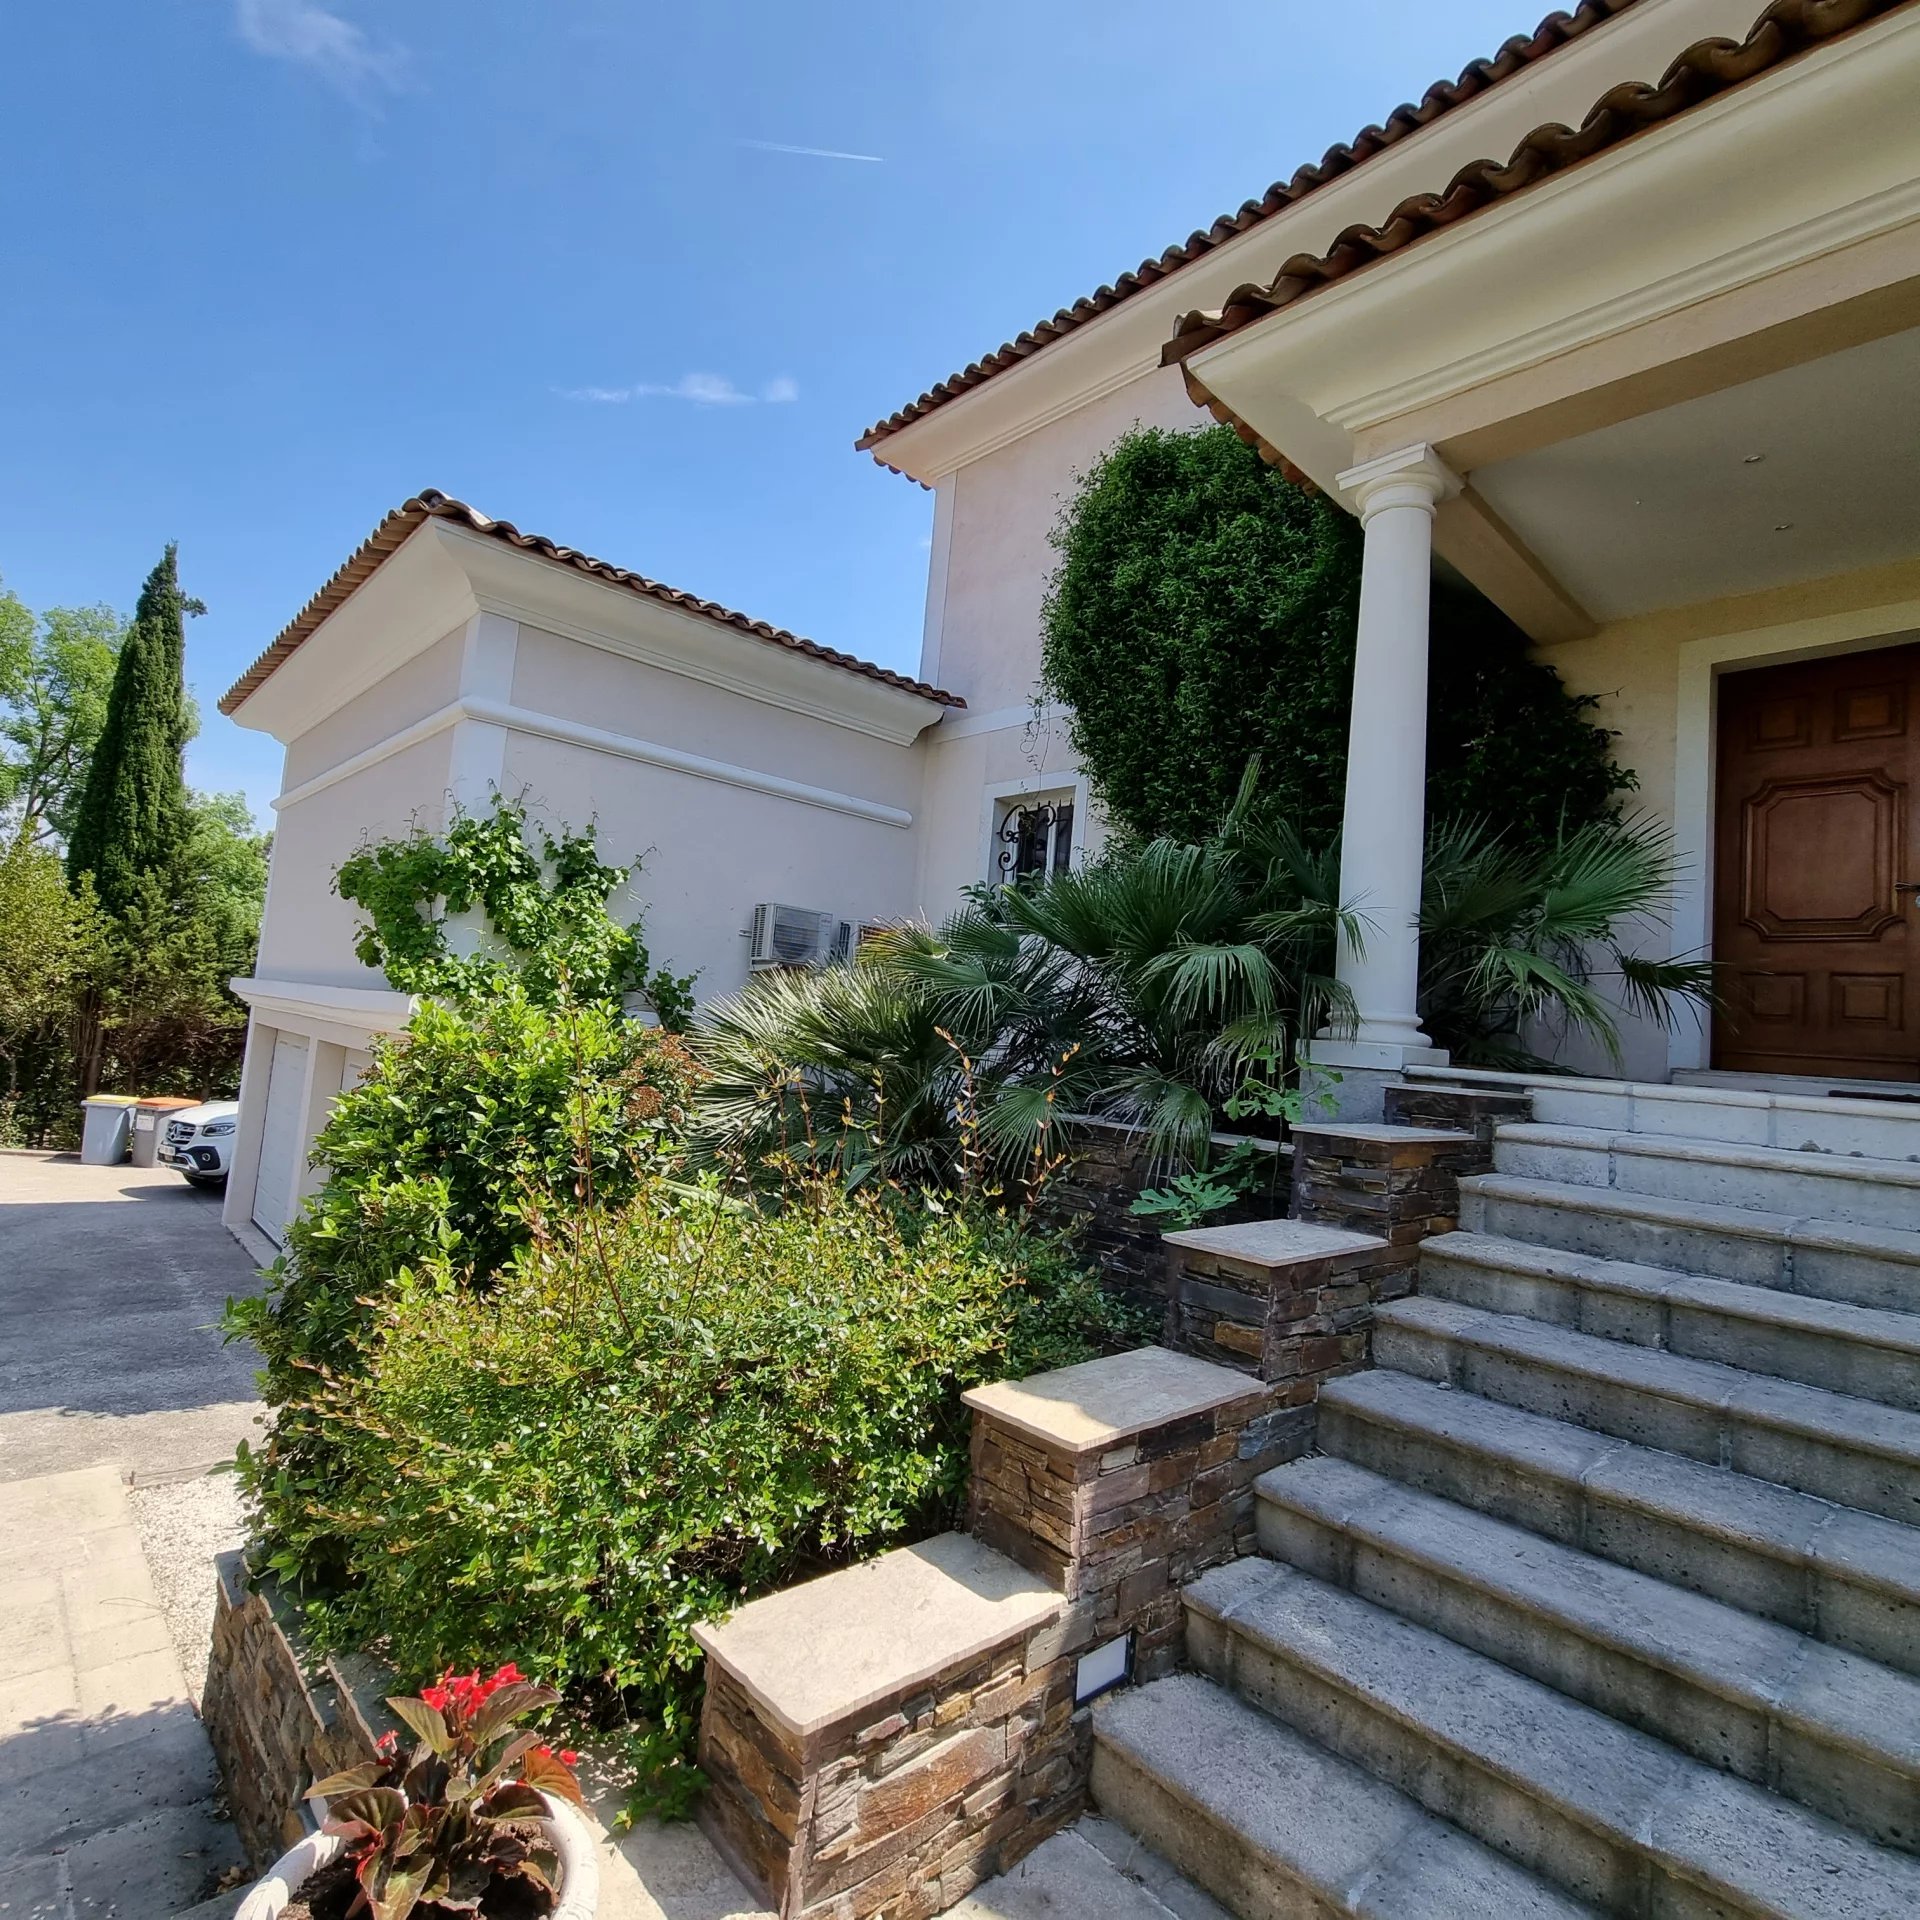 Outstanding property full of charm and privacy in Valescure area.